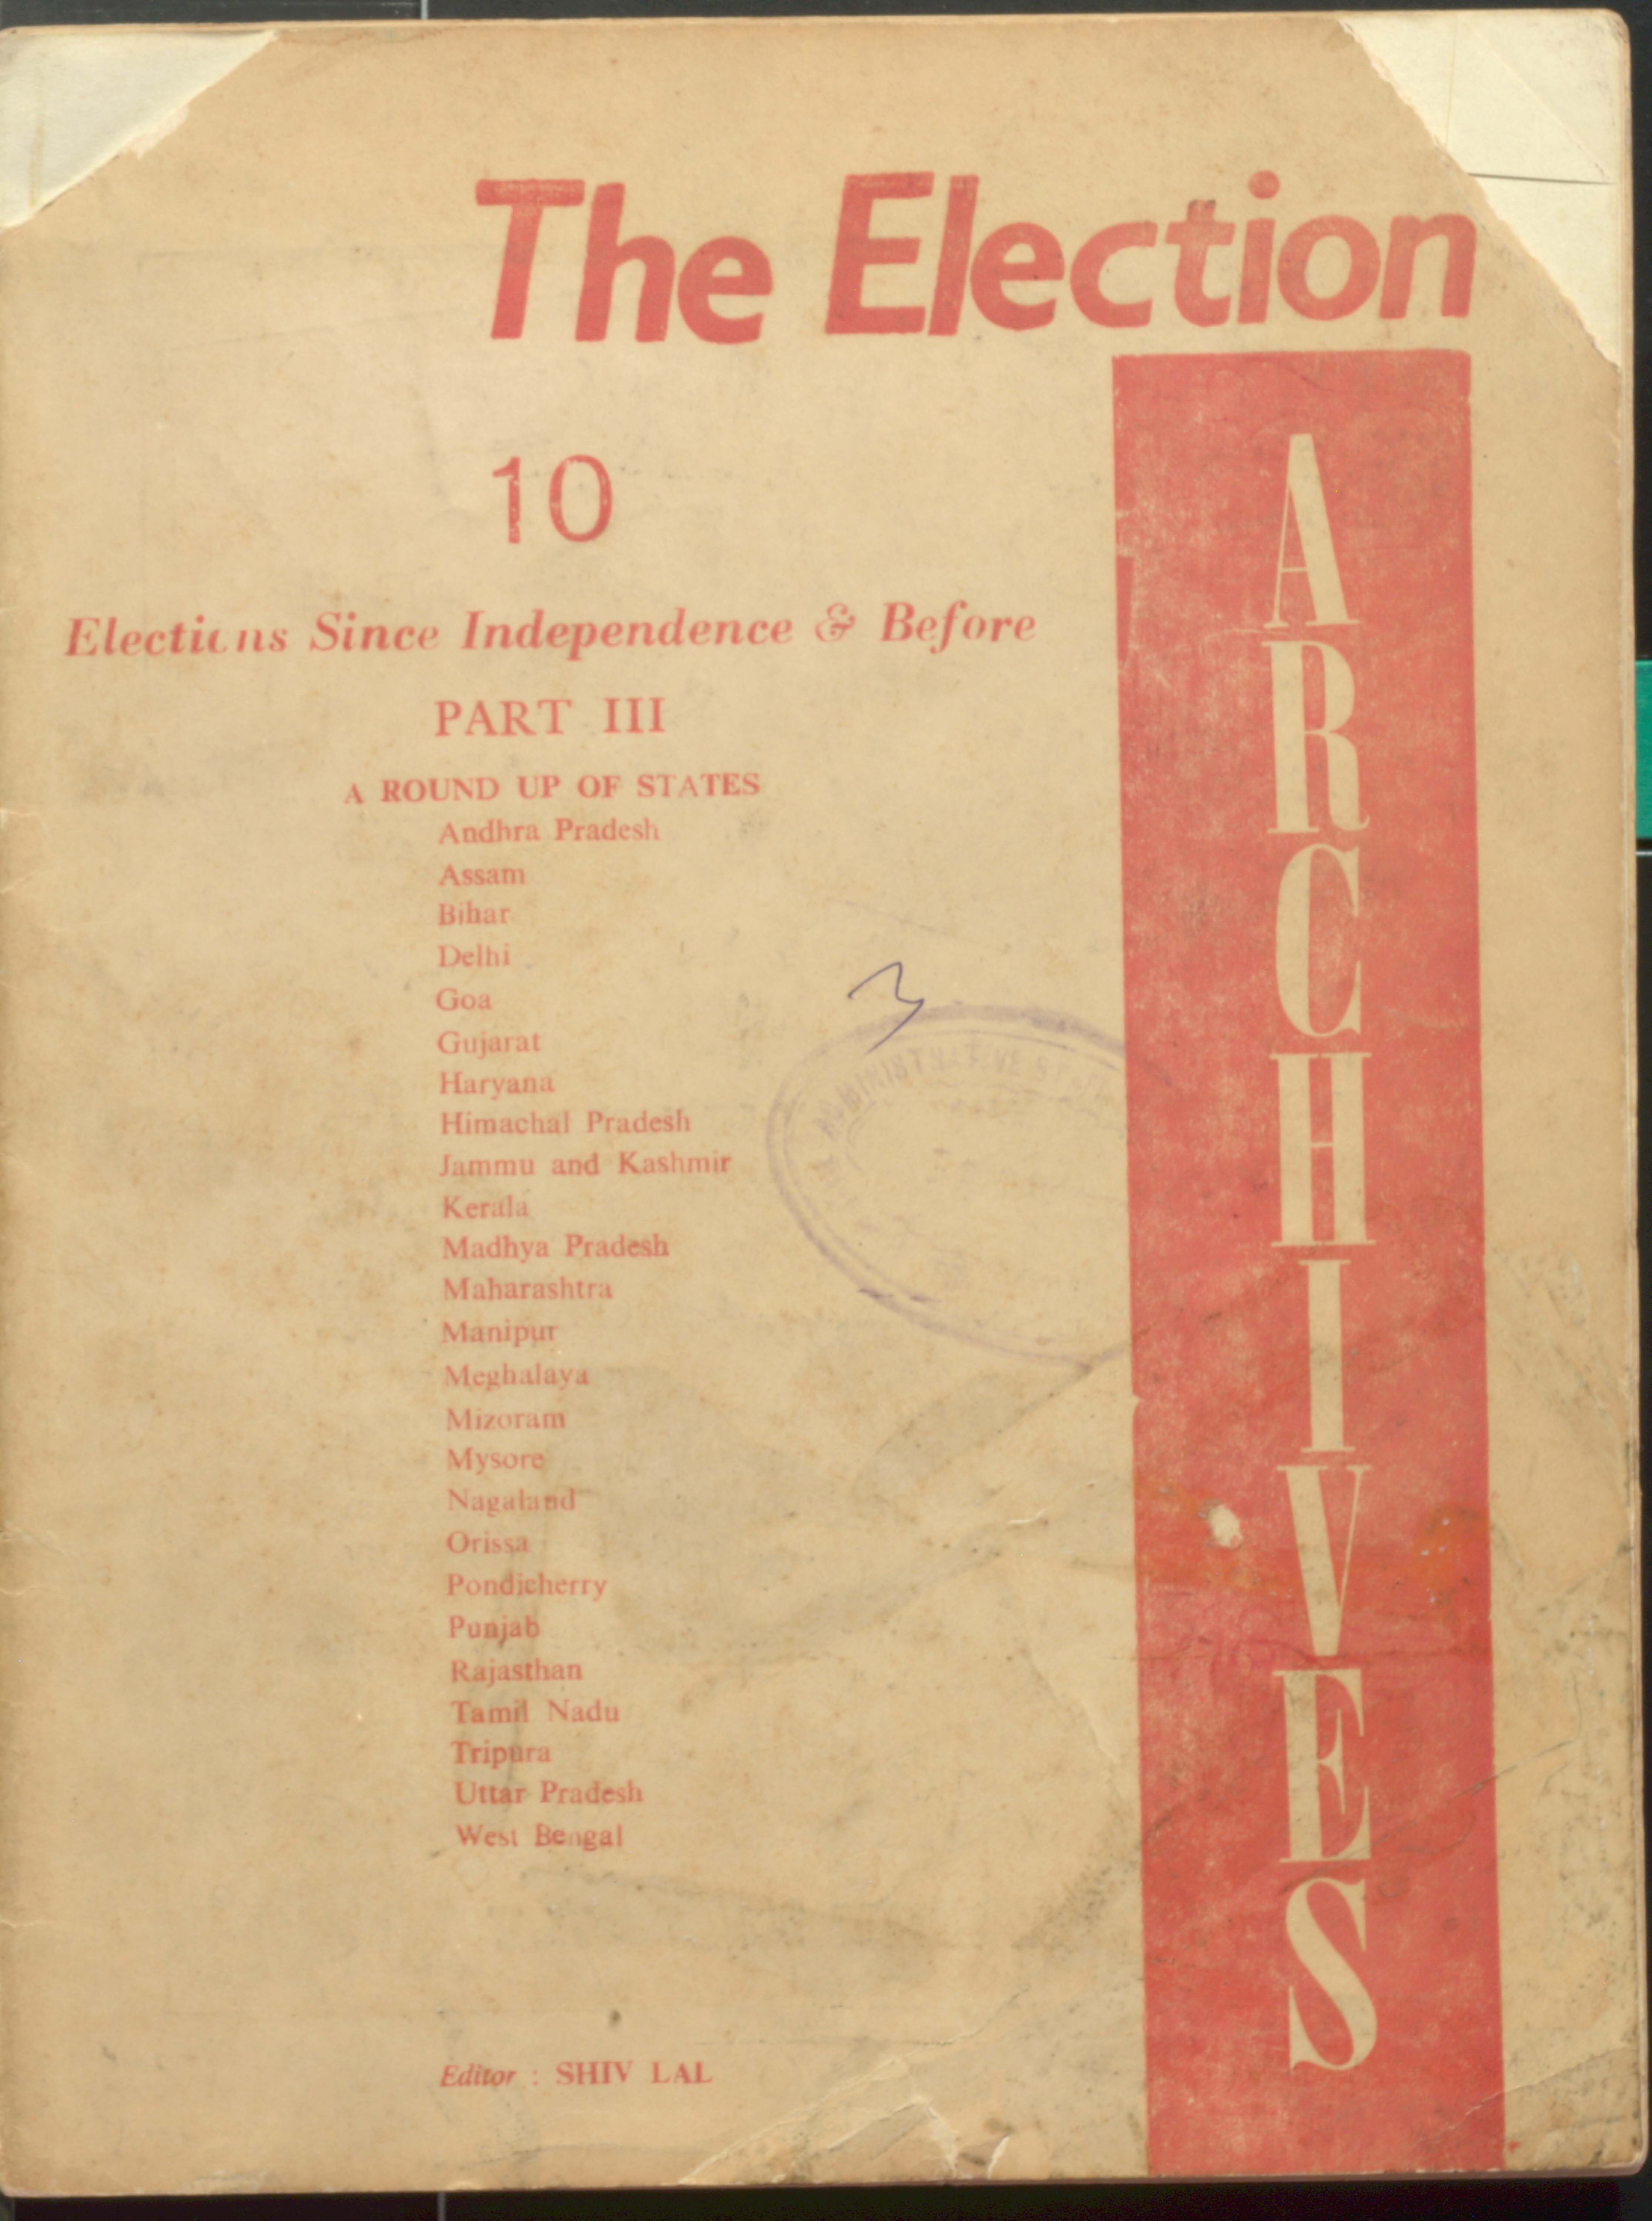 The election archives